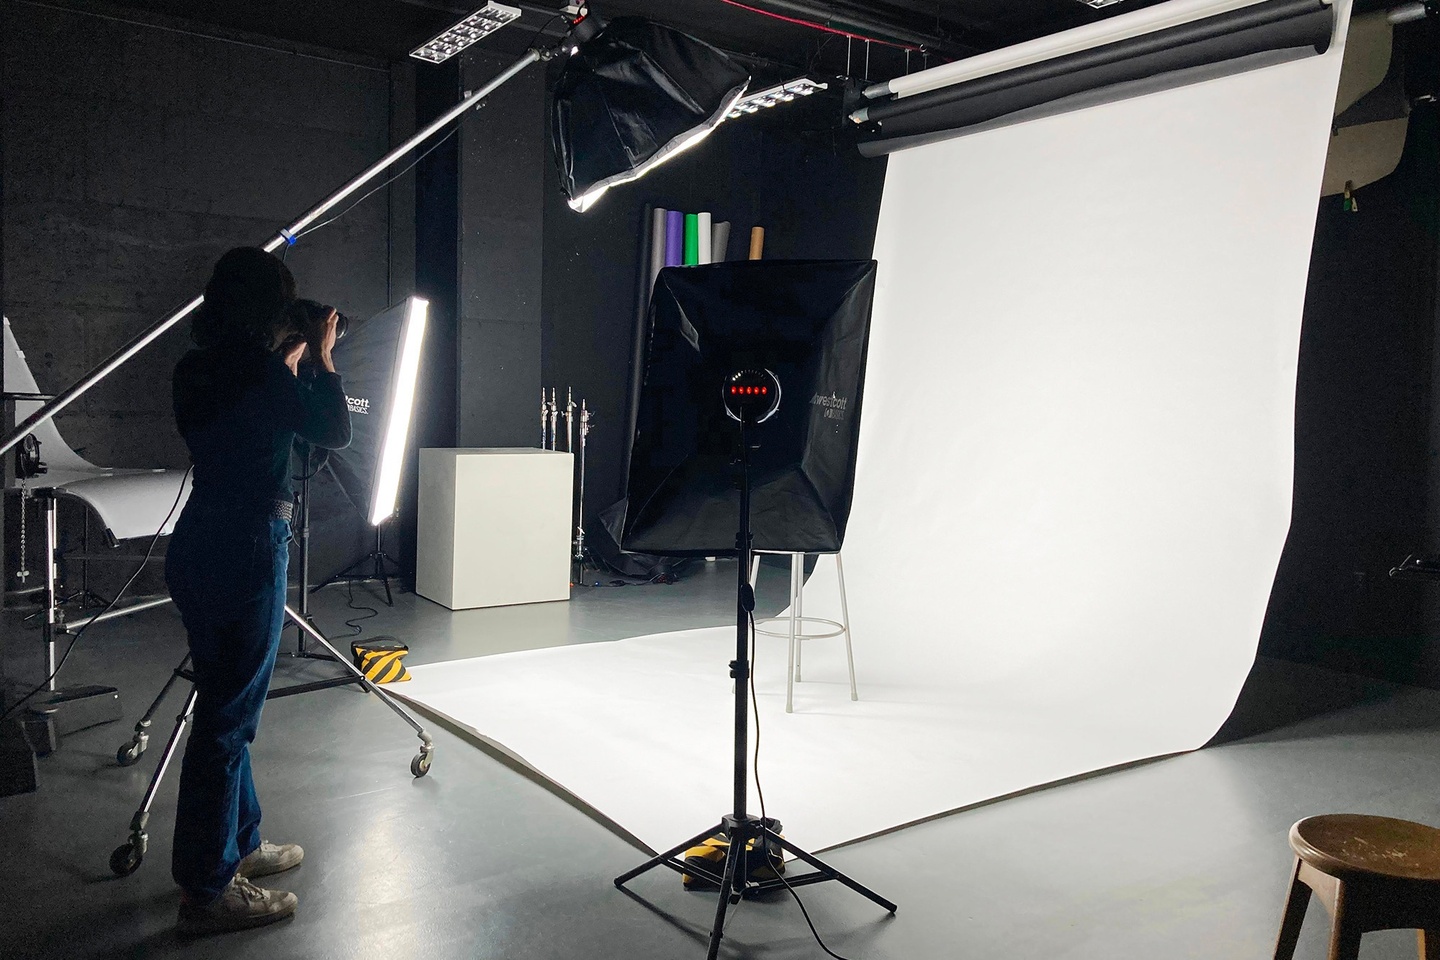 Person photographing work in the lighting studio, using special equipment such as an unfurled white backdrop and lights.